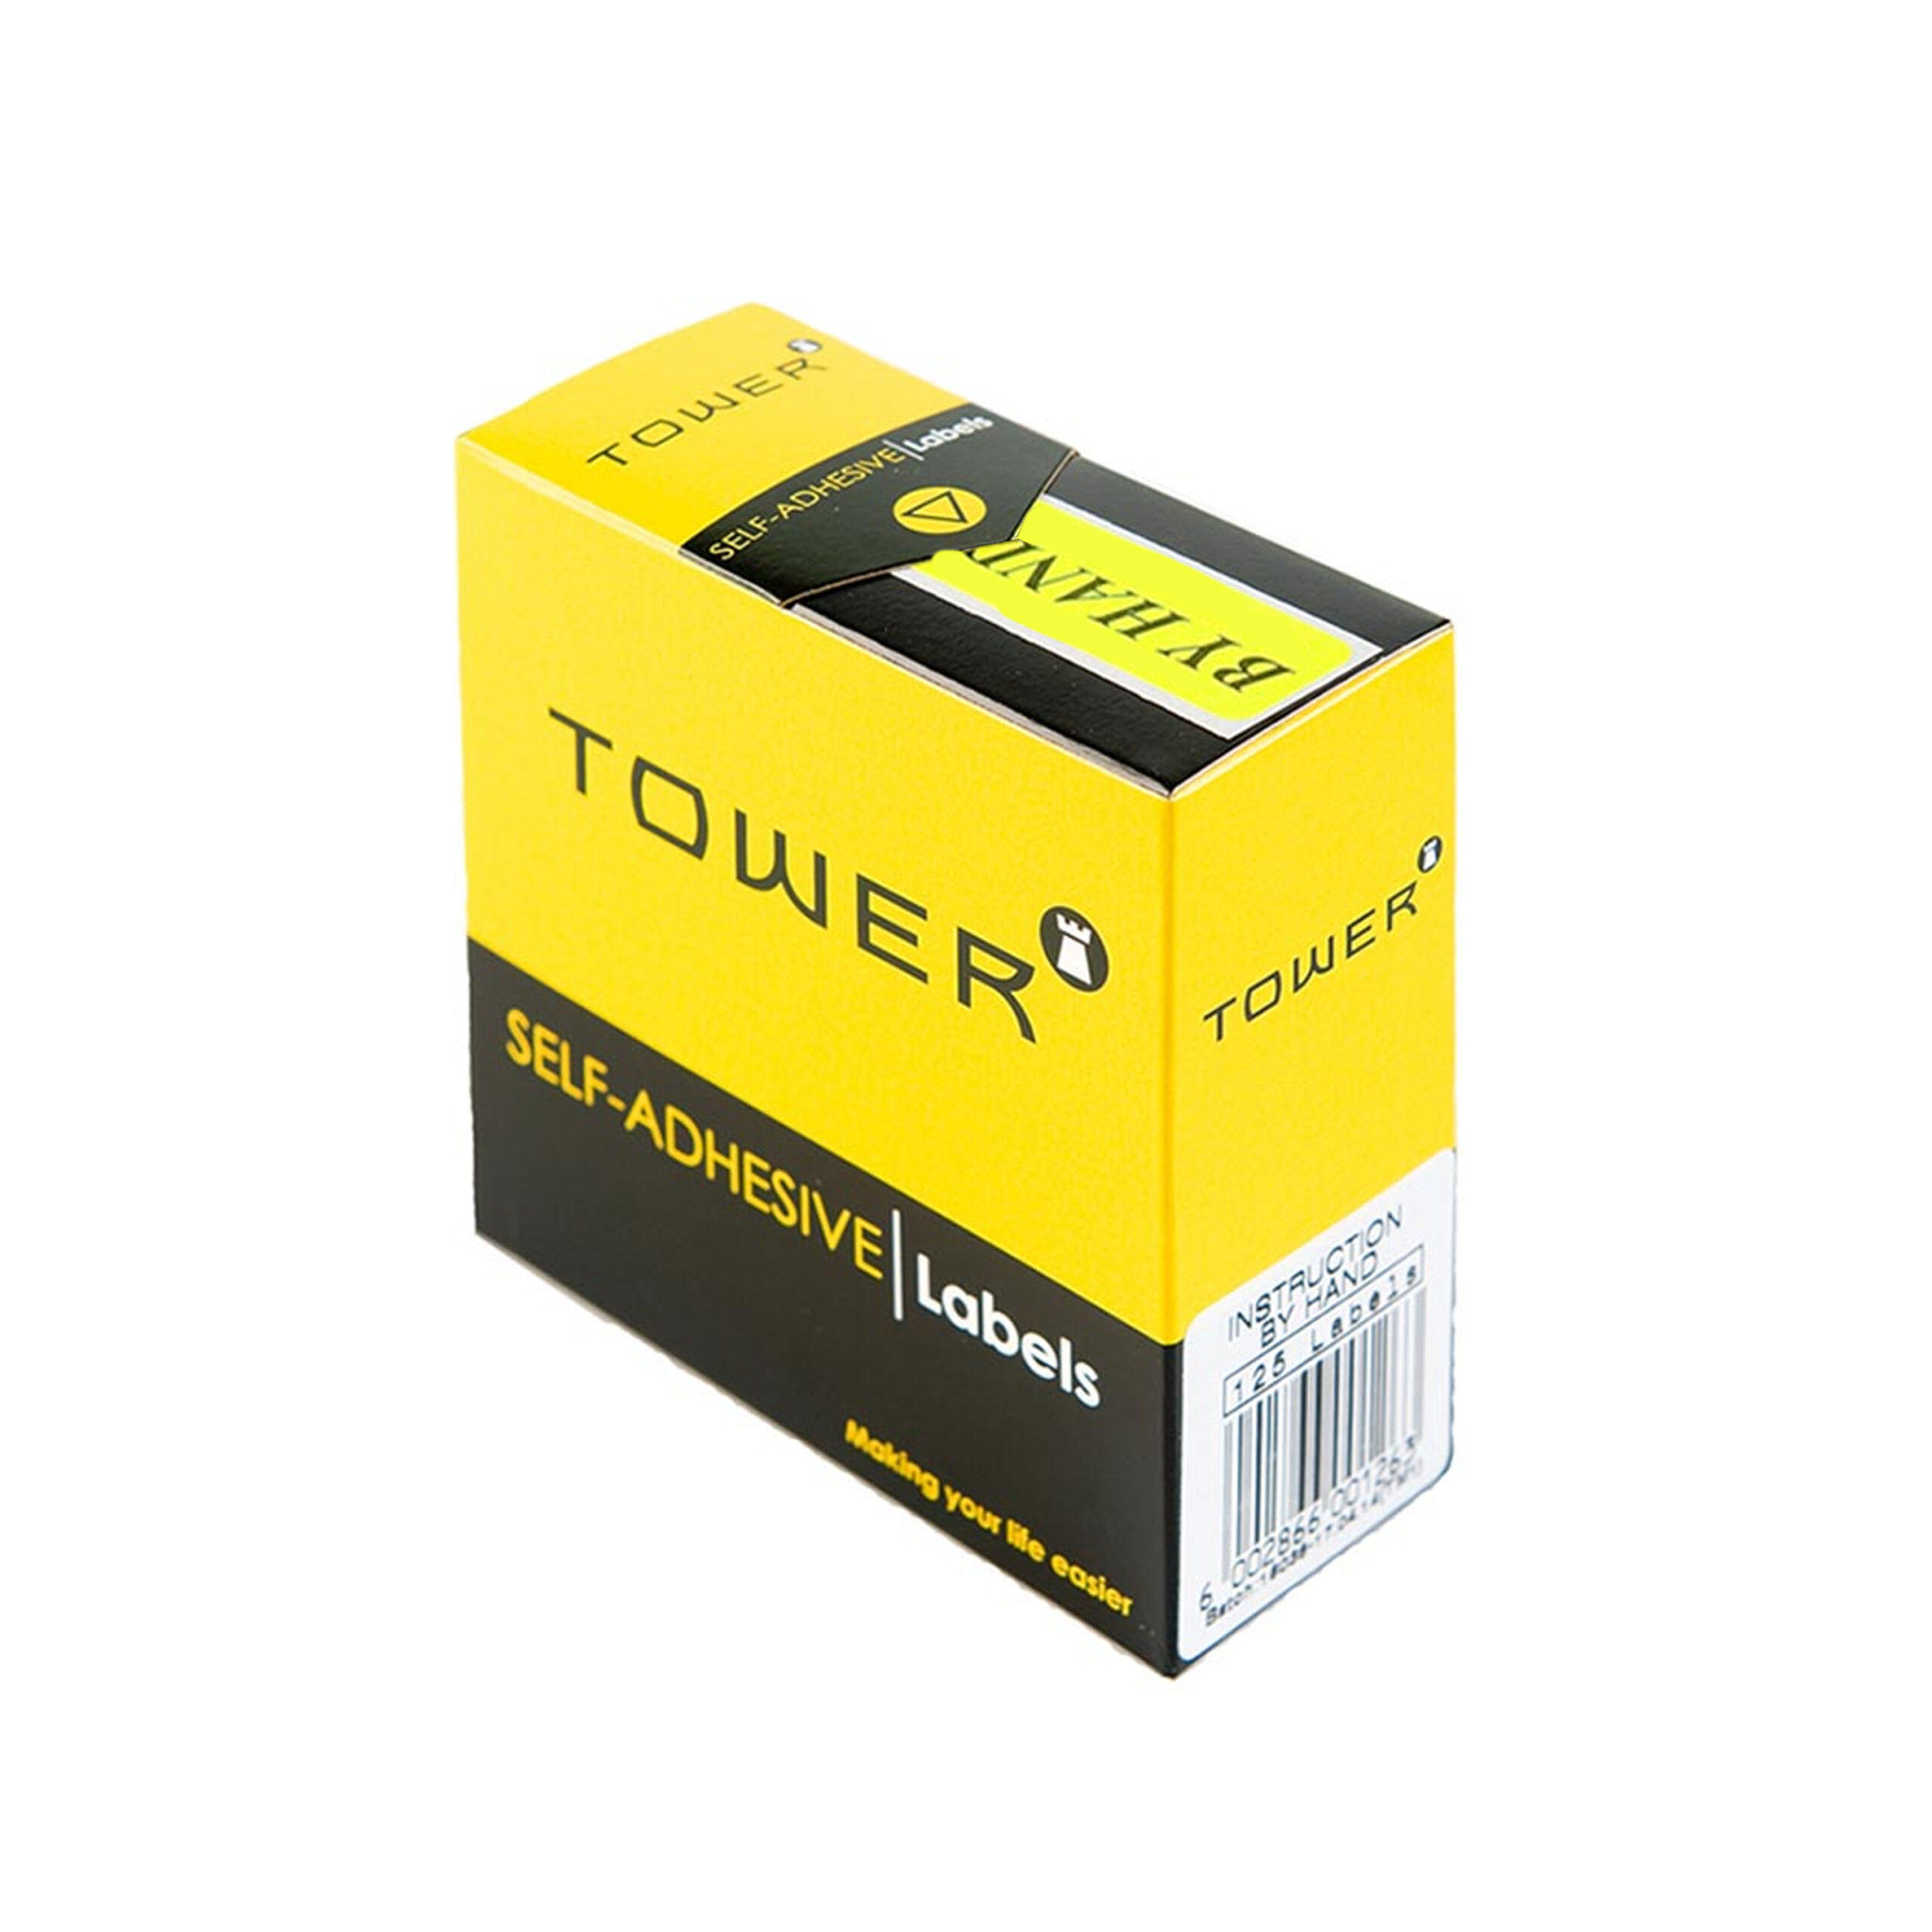 TOWER  "BY HAND"
SELF ADHESIVE
LABELS  (125
LABELS)